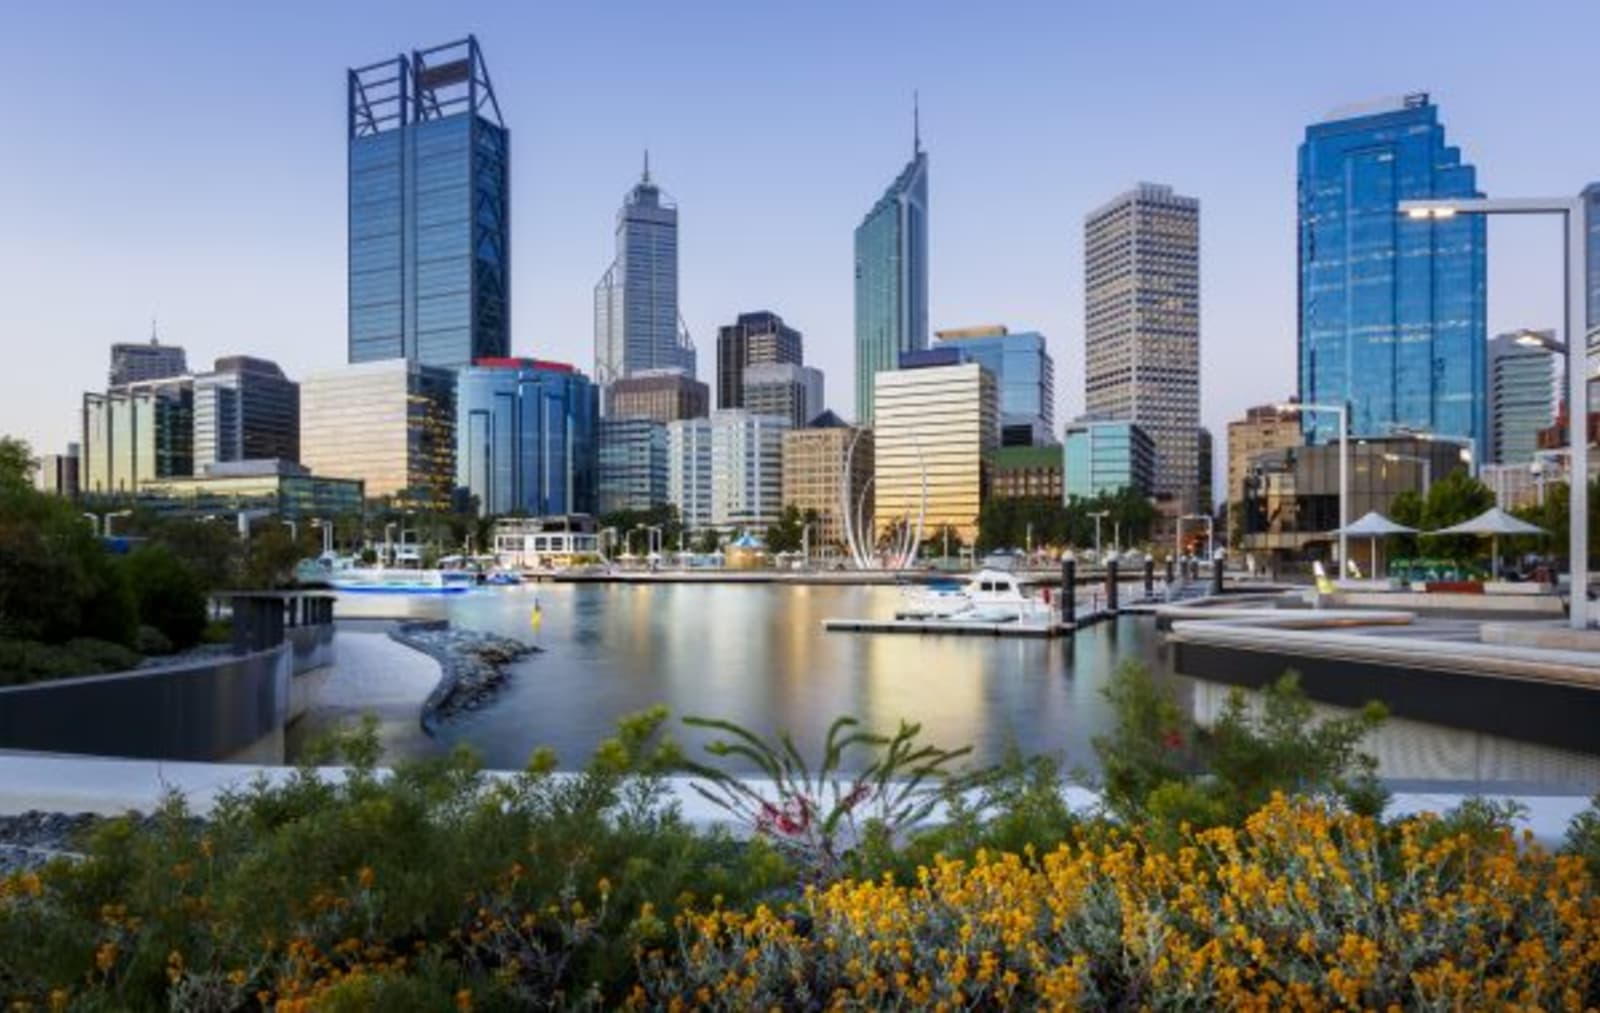 Cityscape of Perth WA from Elizabeth Quay Just after sunset